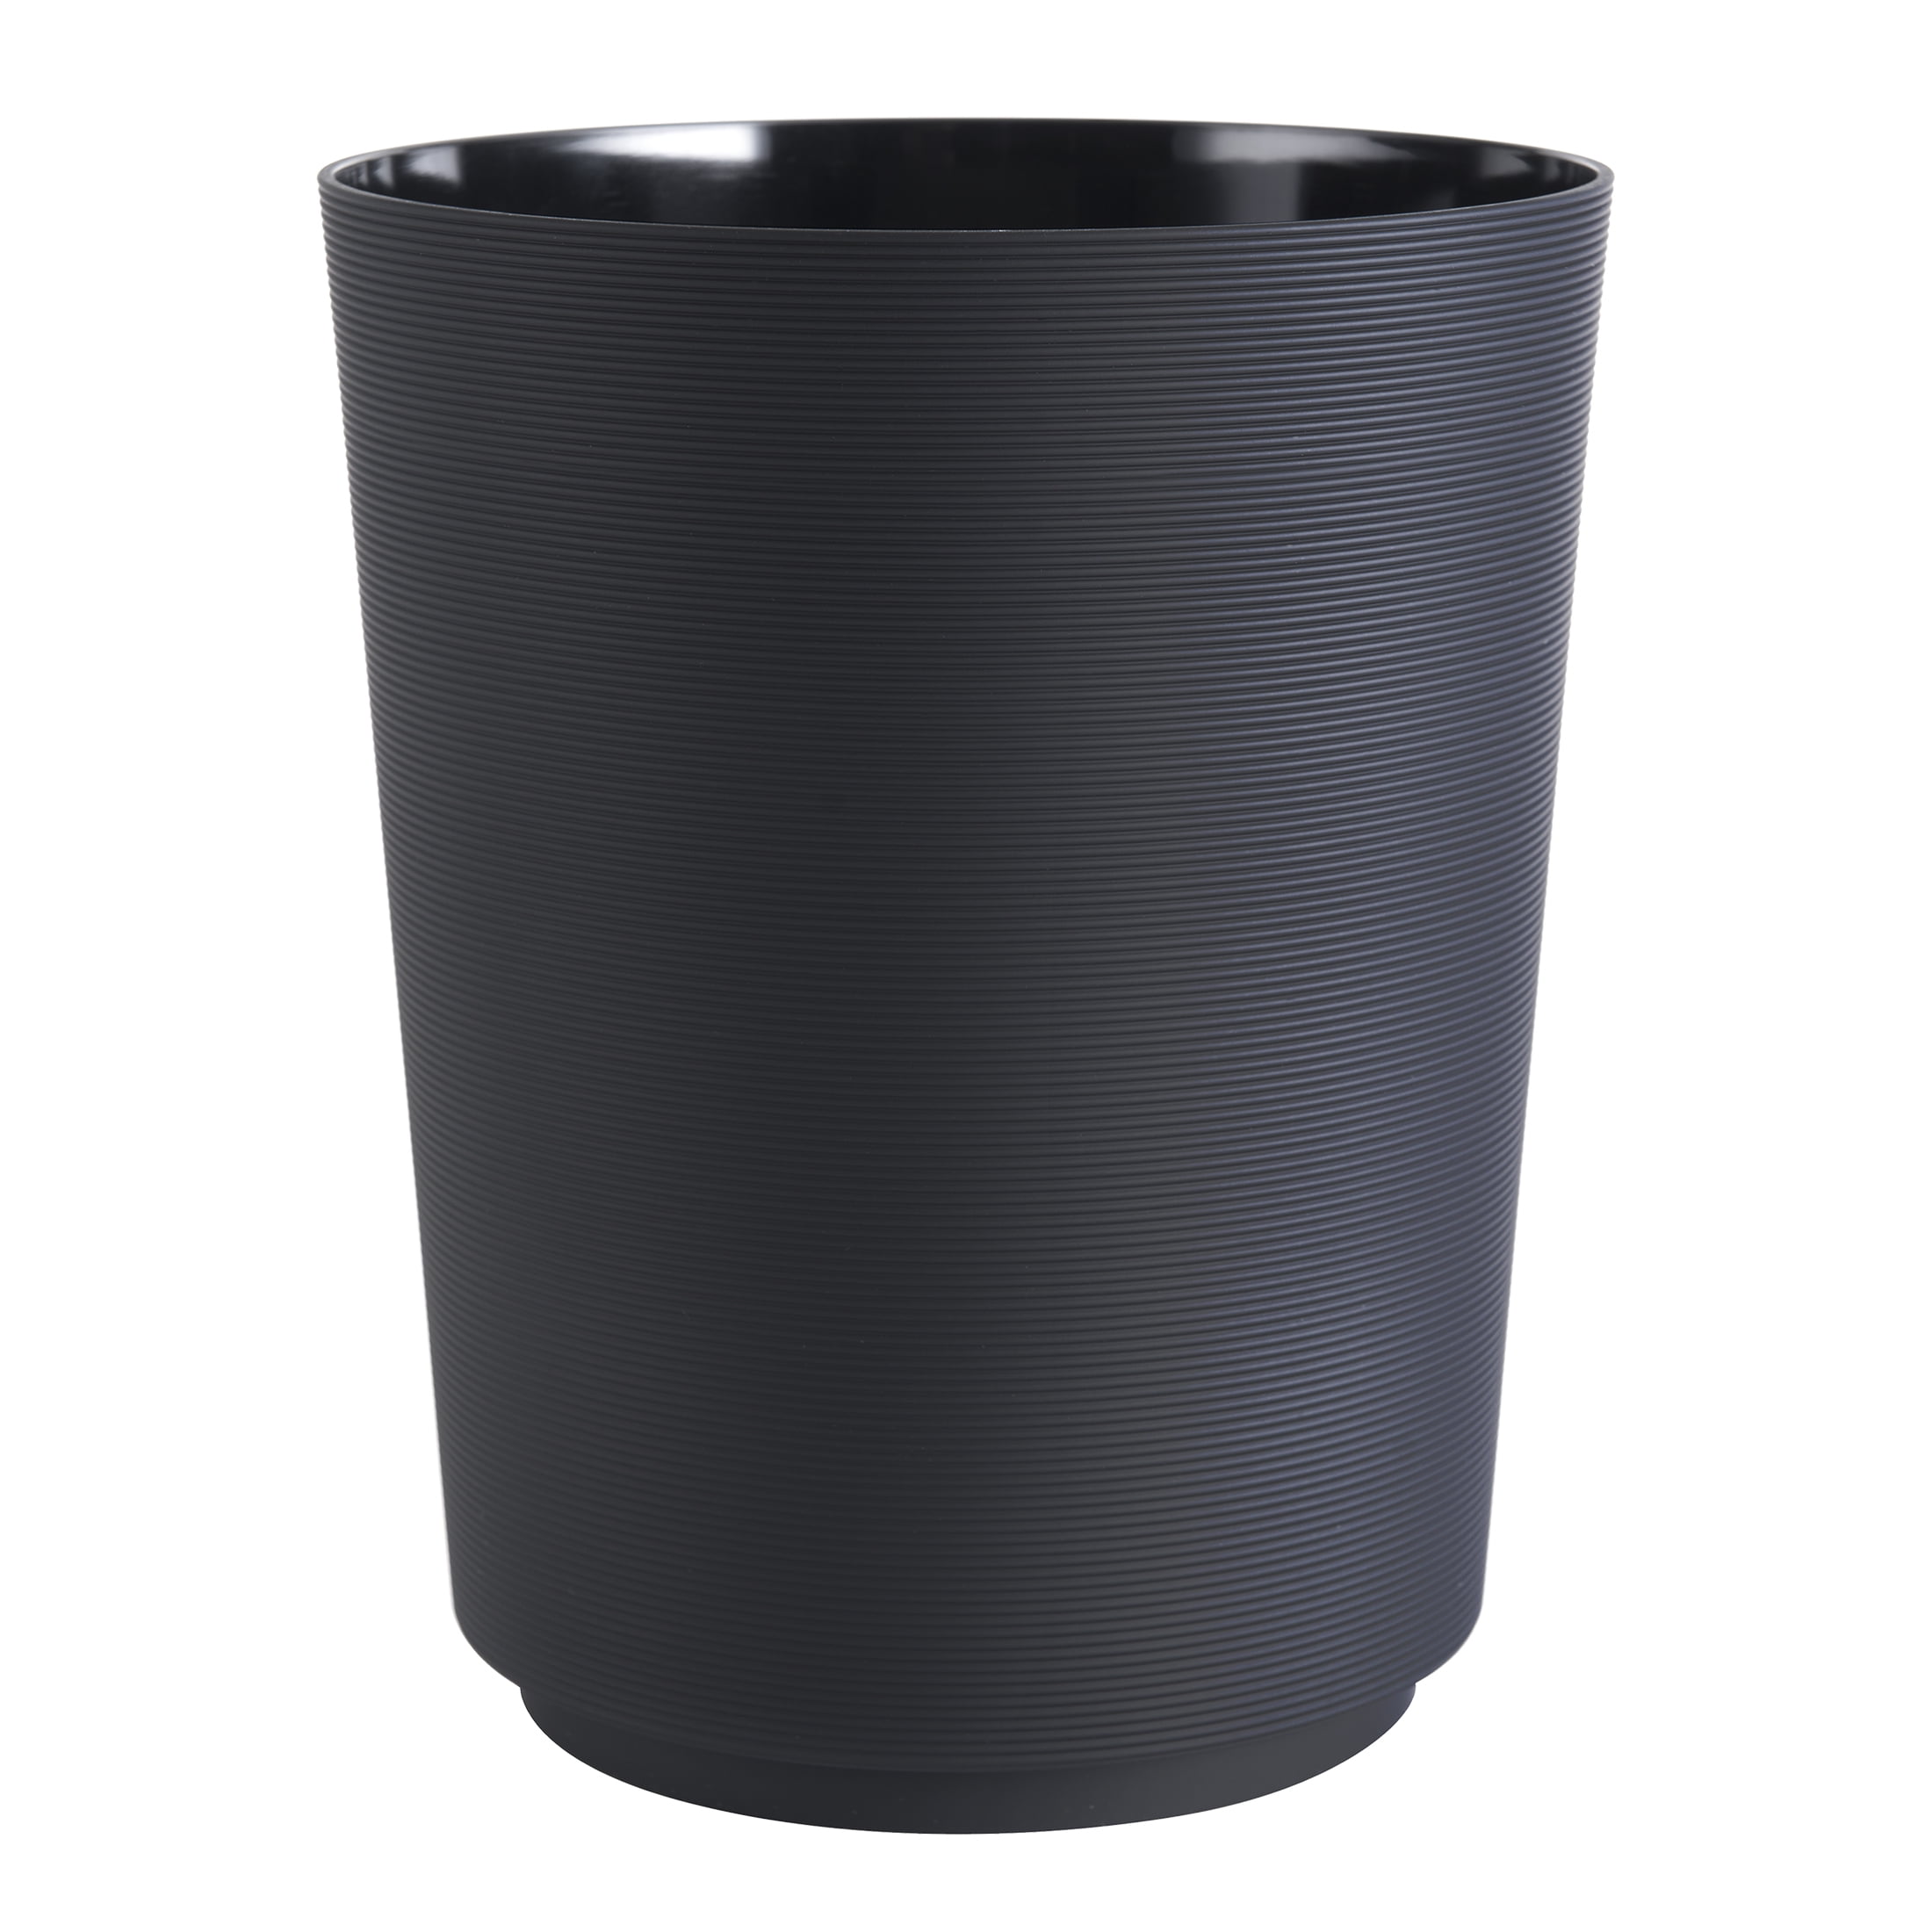 Details about   iDesign Kent Plastic Wastebasket Small Round Bathroom Office Trash Can Bronze 